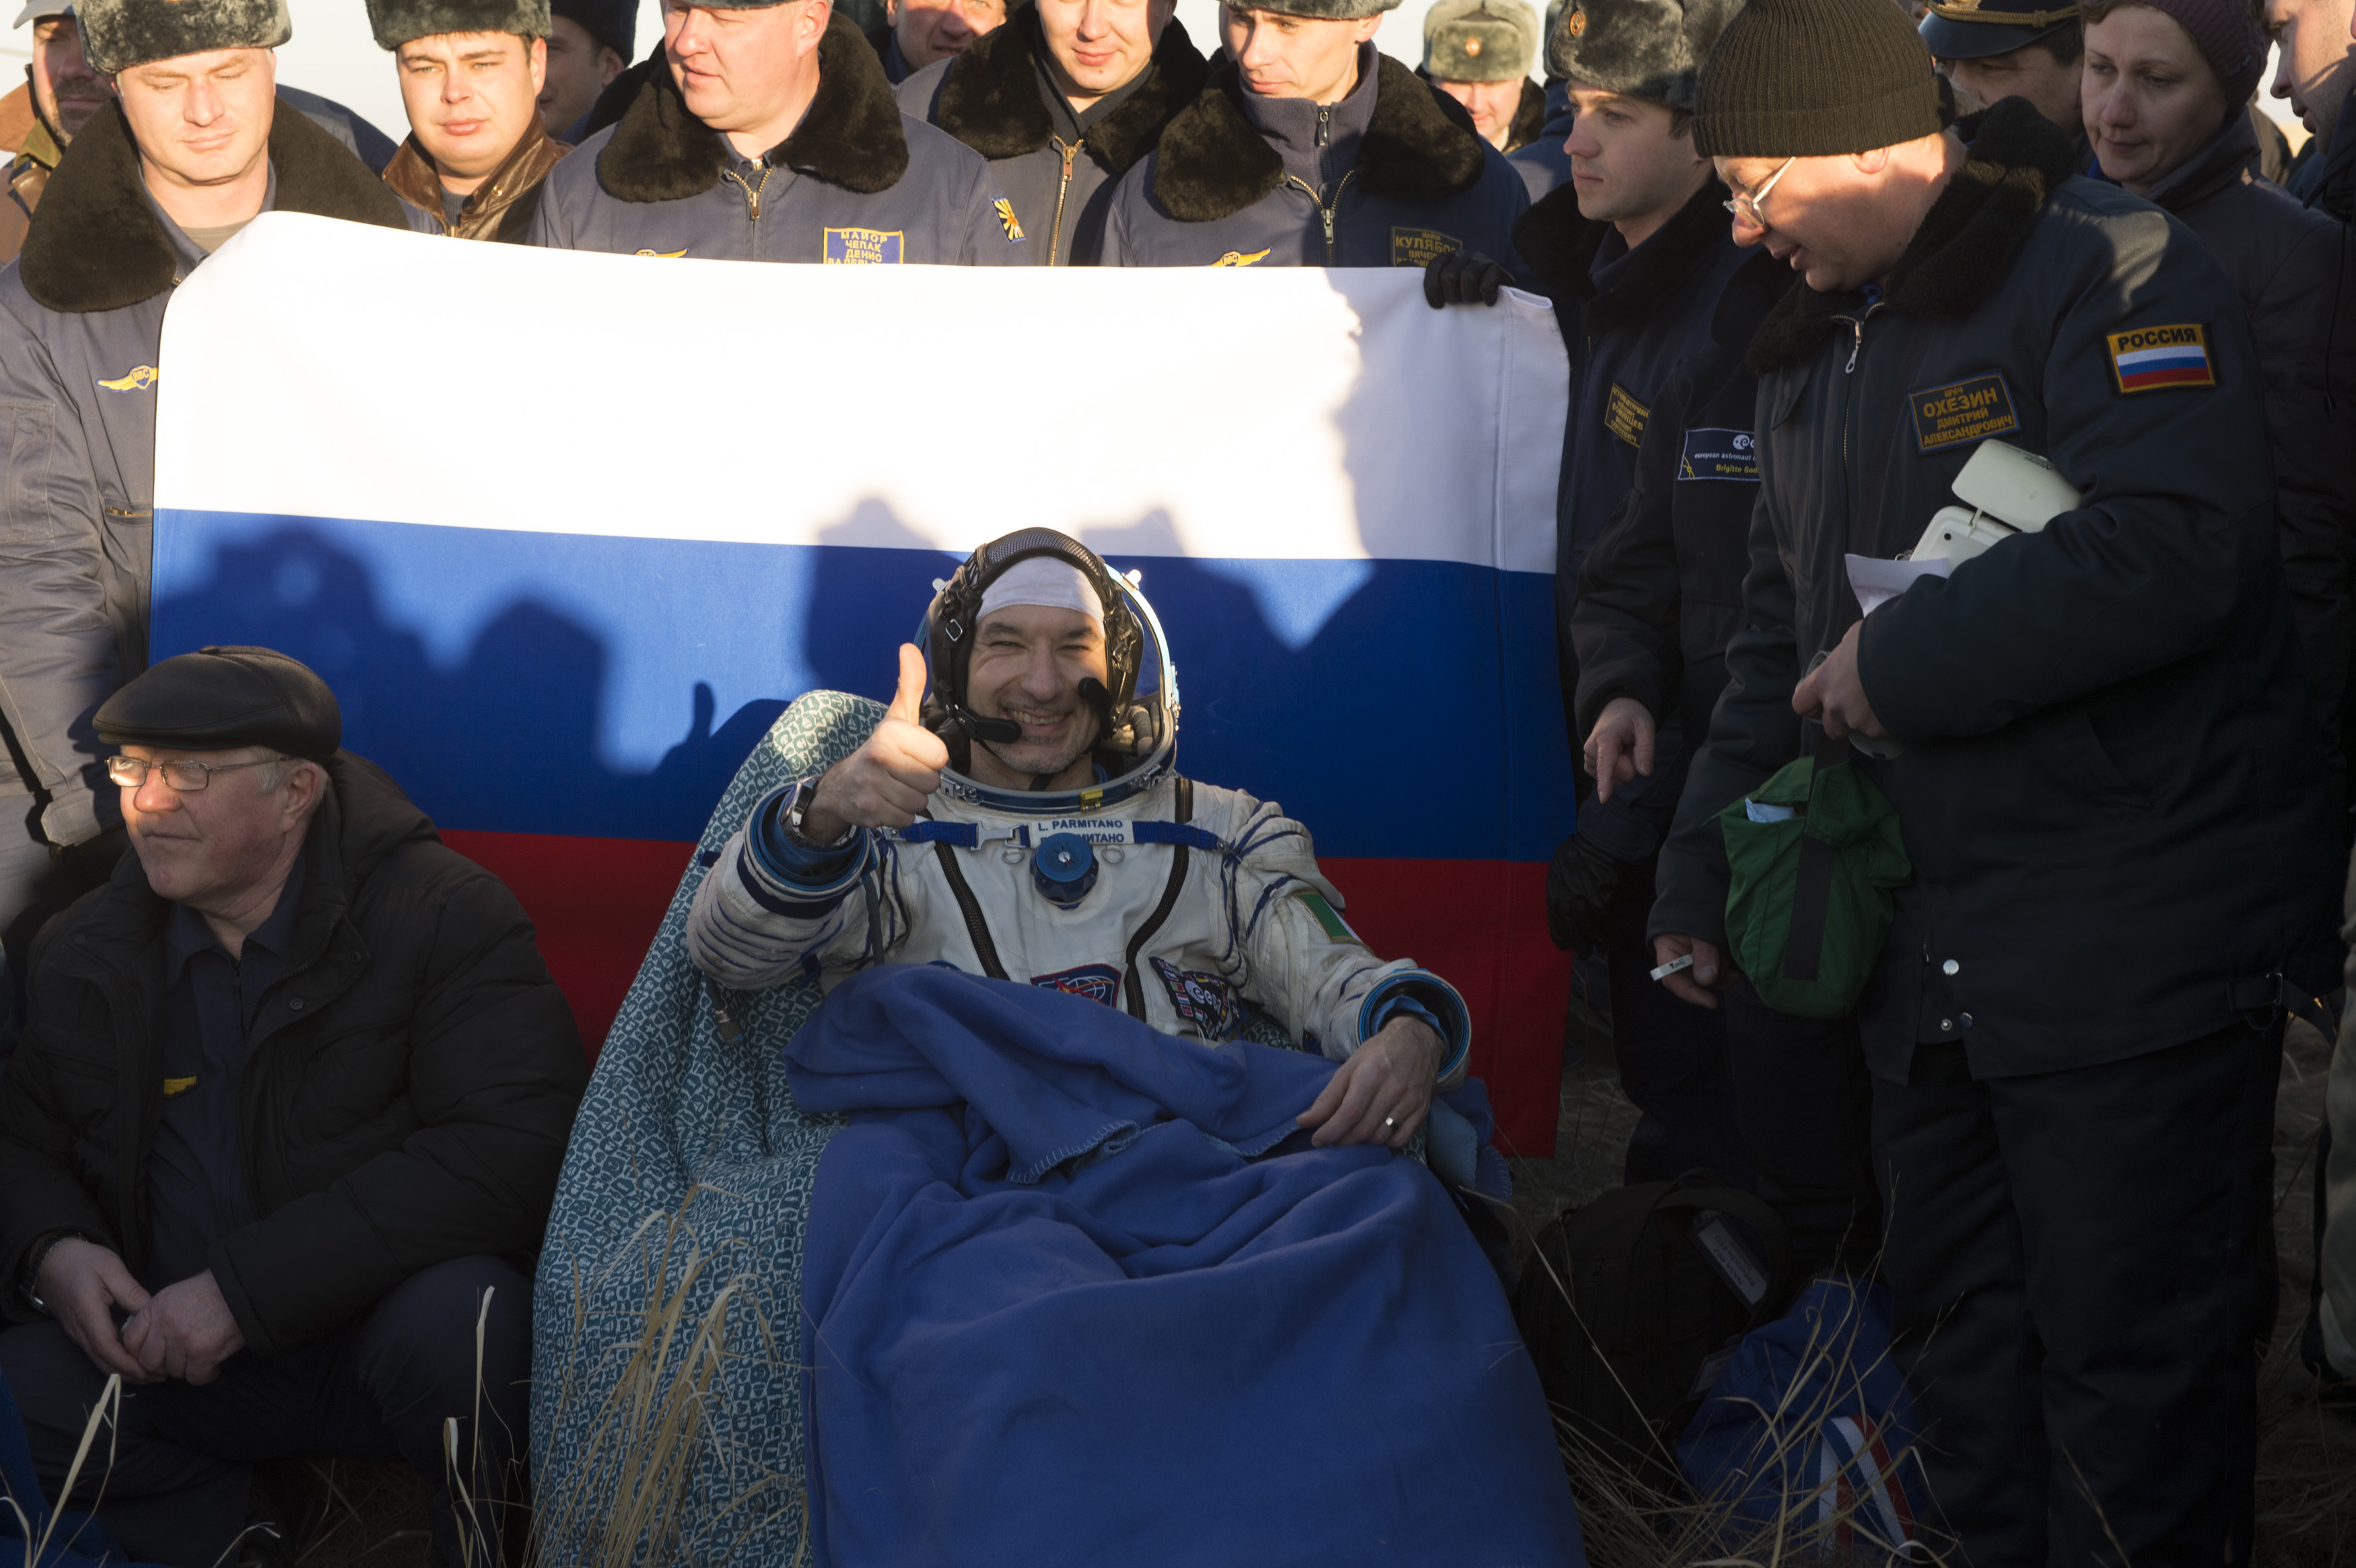 In this handout photo provided by the European Space Agency (ESA), ESA astronaut Luca Parmitano poses for photographs after returning to earth in the Soyuz TMA-09M spacecraft in the Kazakh Steppe region on Novemeber 11, 2013 in Kazakhstan. (Handout&mdash;2013 ESA)